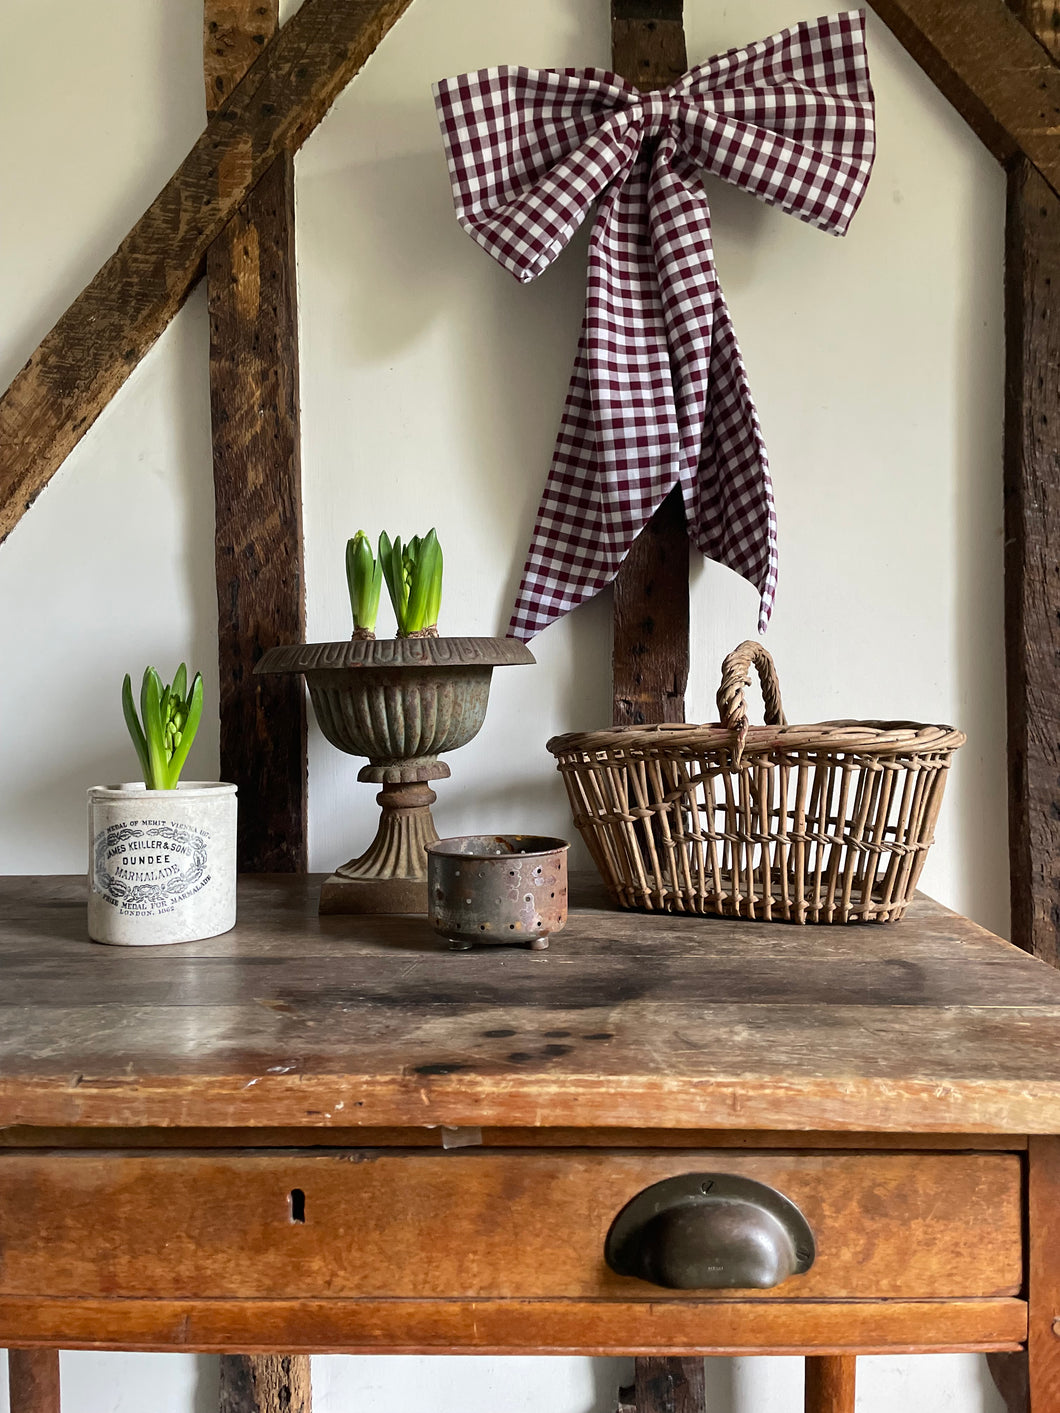 Rustic French basket